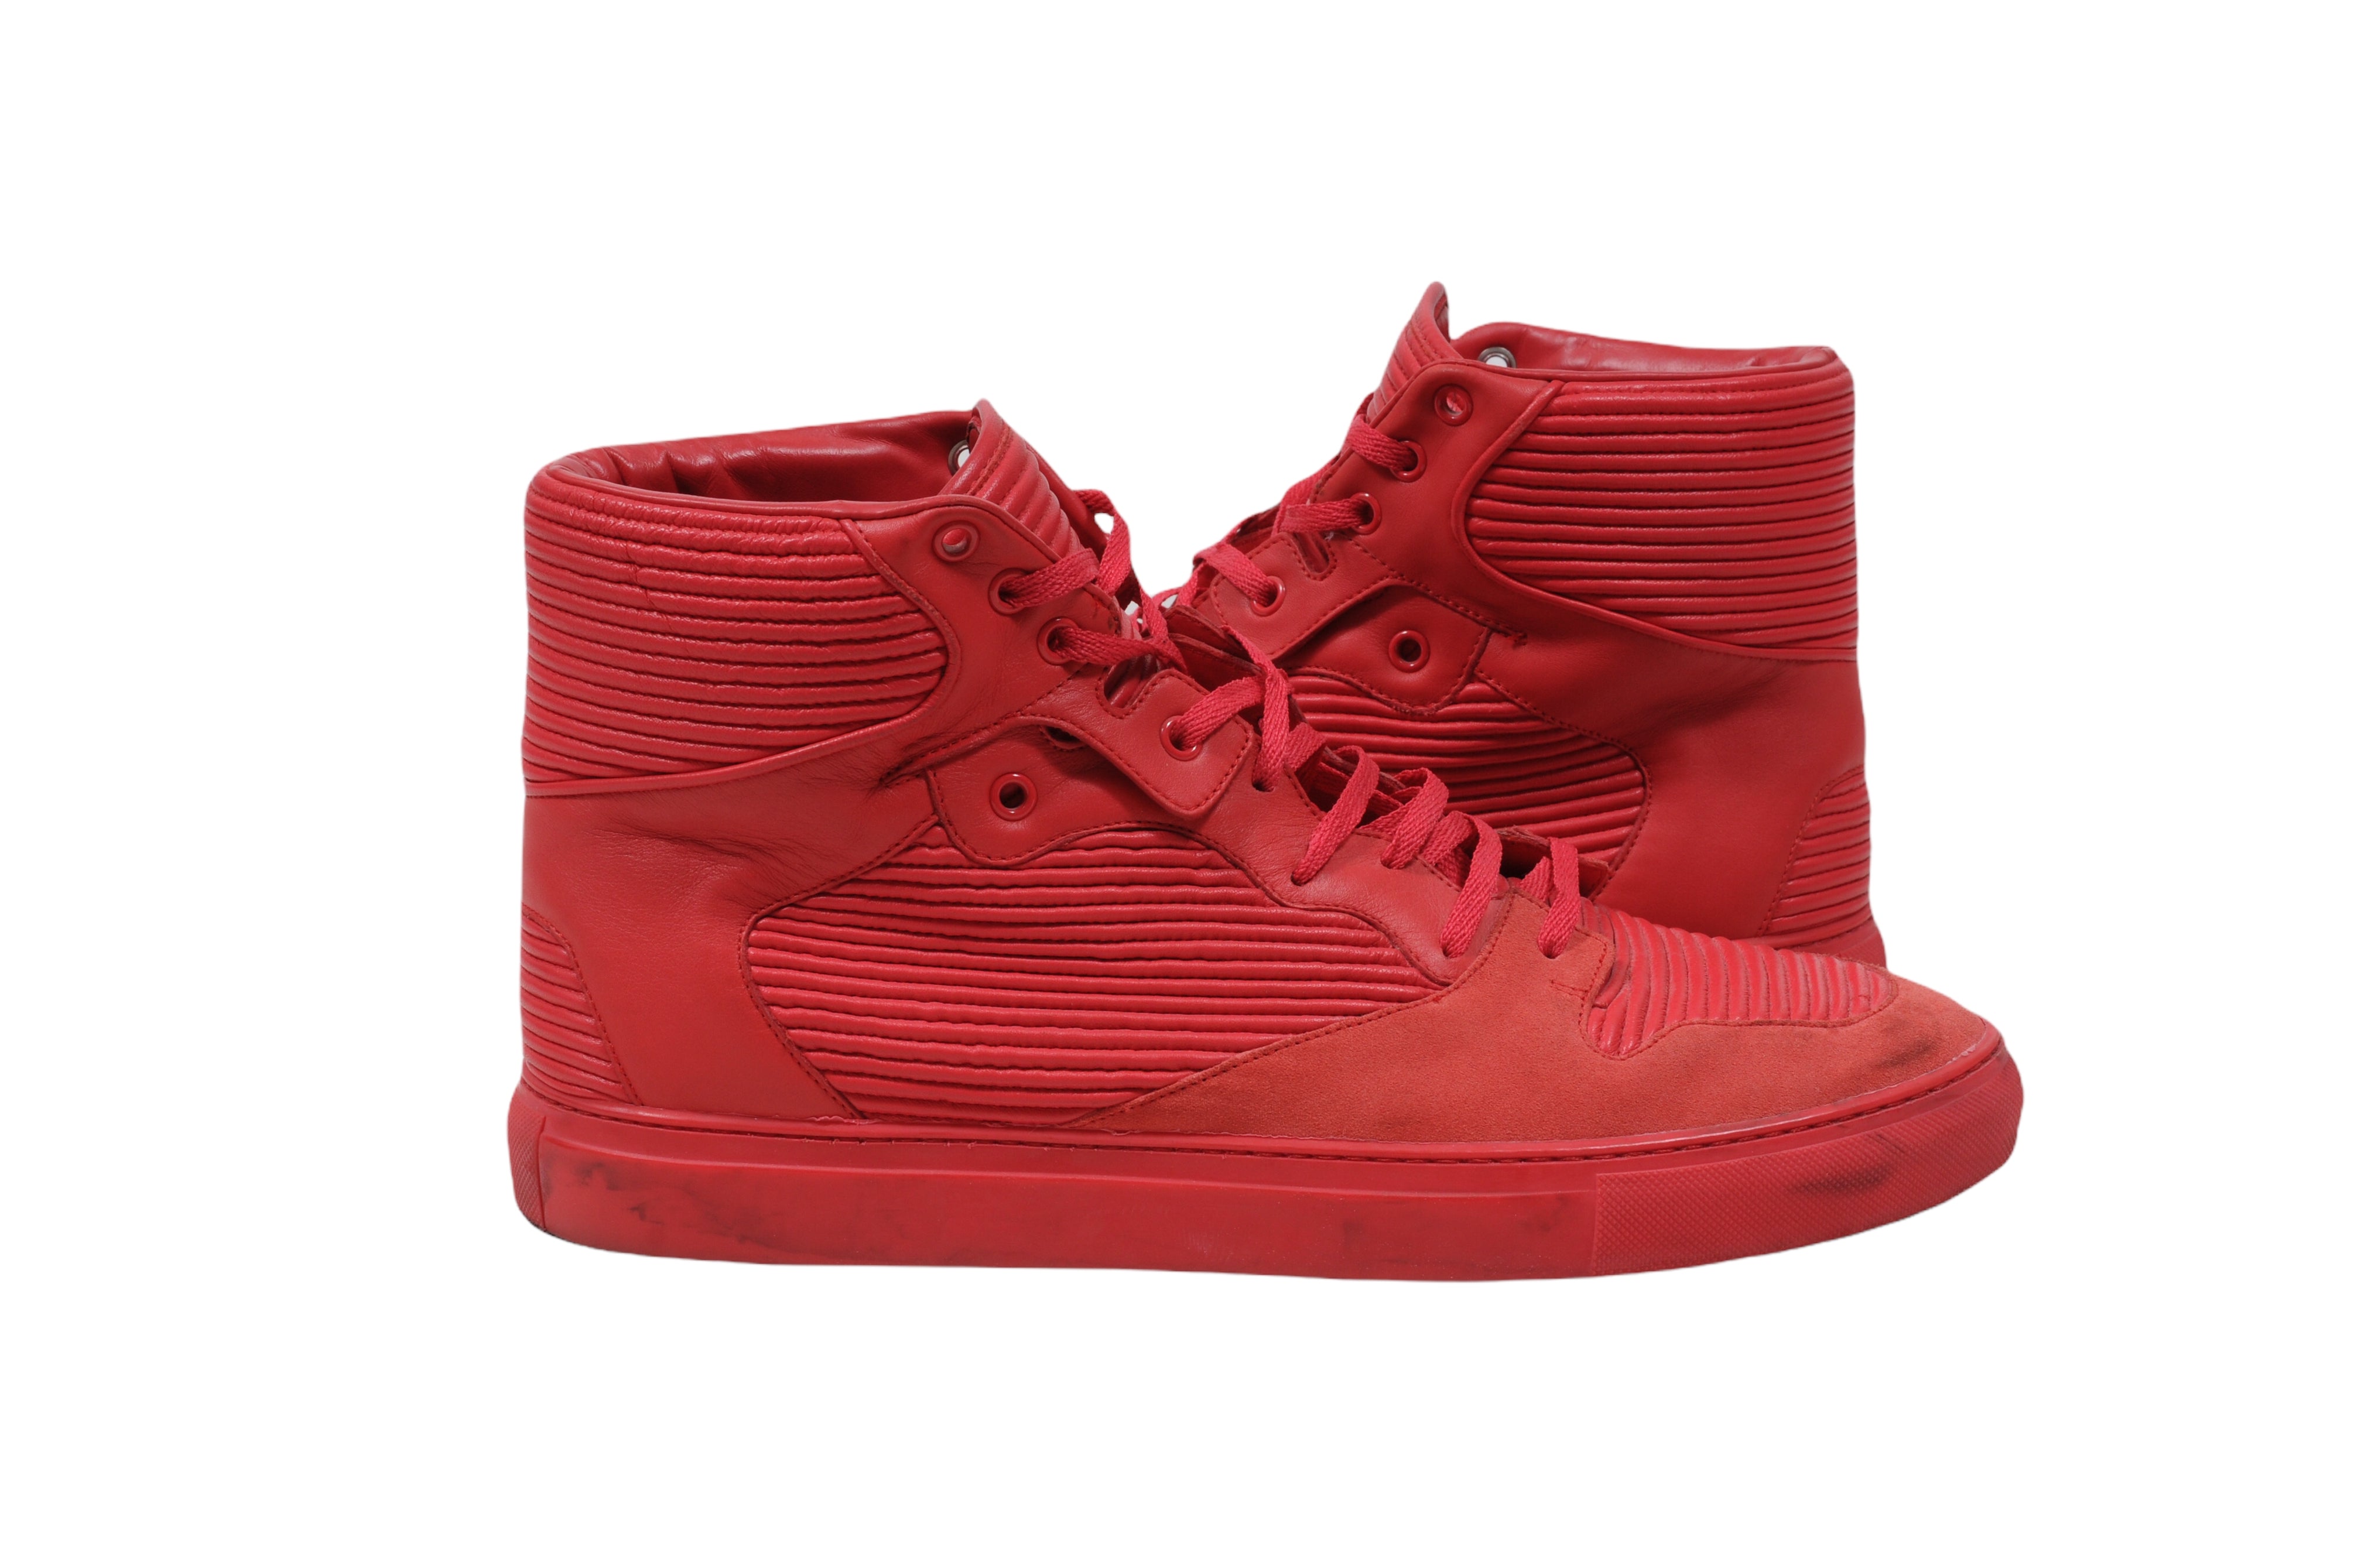 Herske spids Forstyrret Balenciaga Men's Red Pleated Leather Suede High Top Sneakers Size 45 12 –  THE-ECHELON